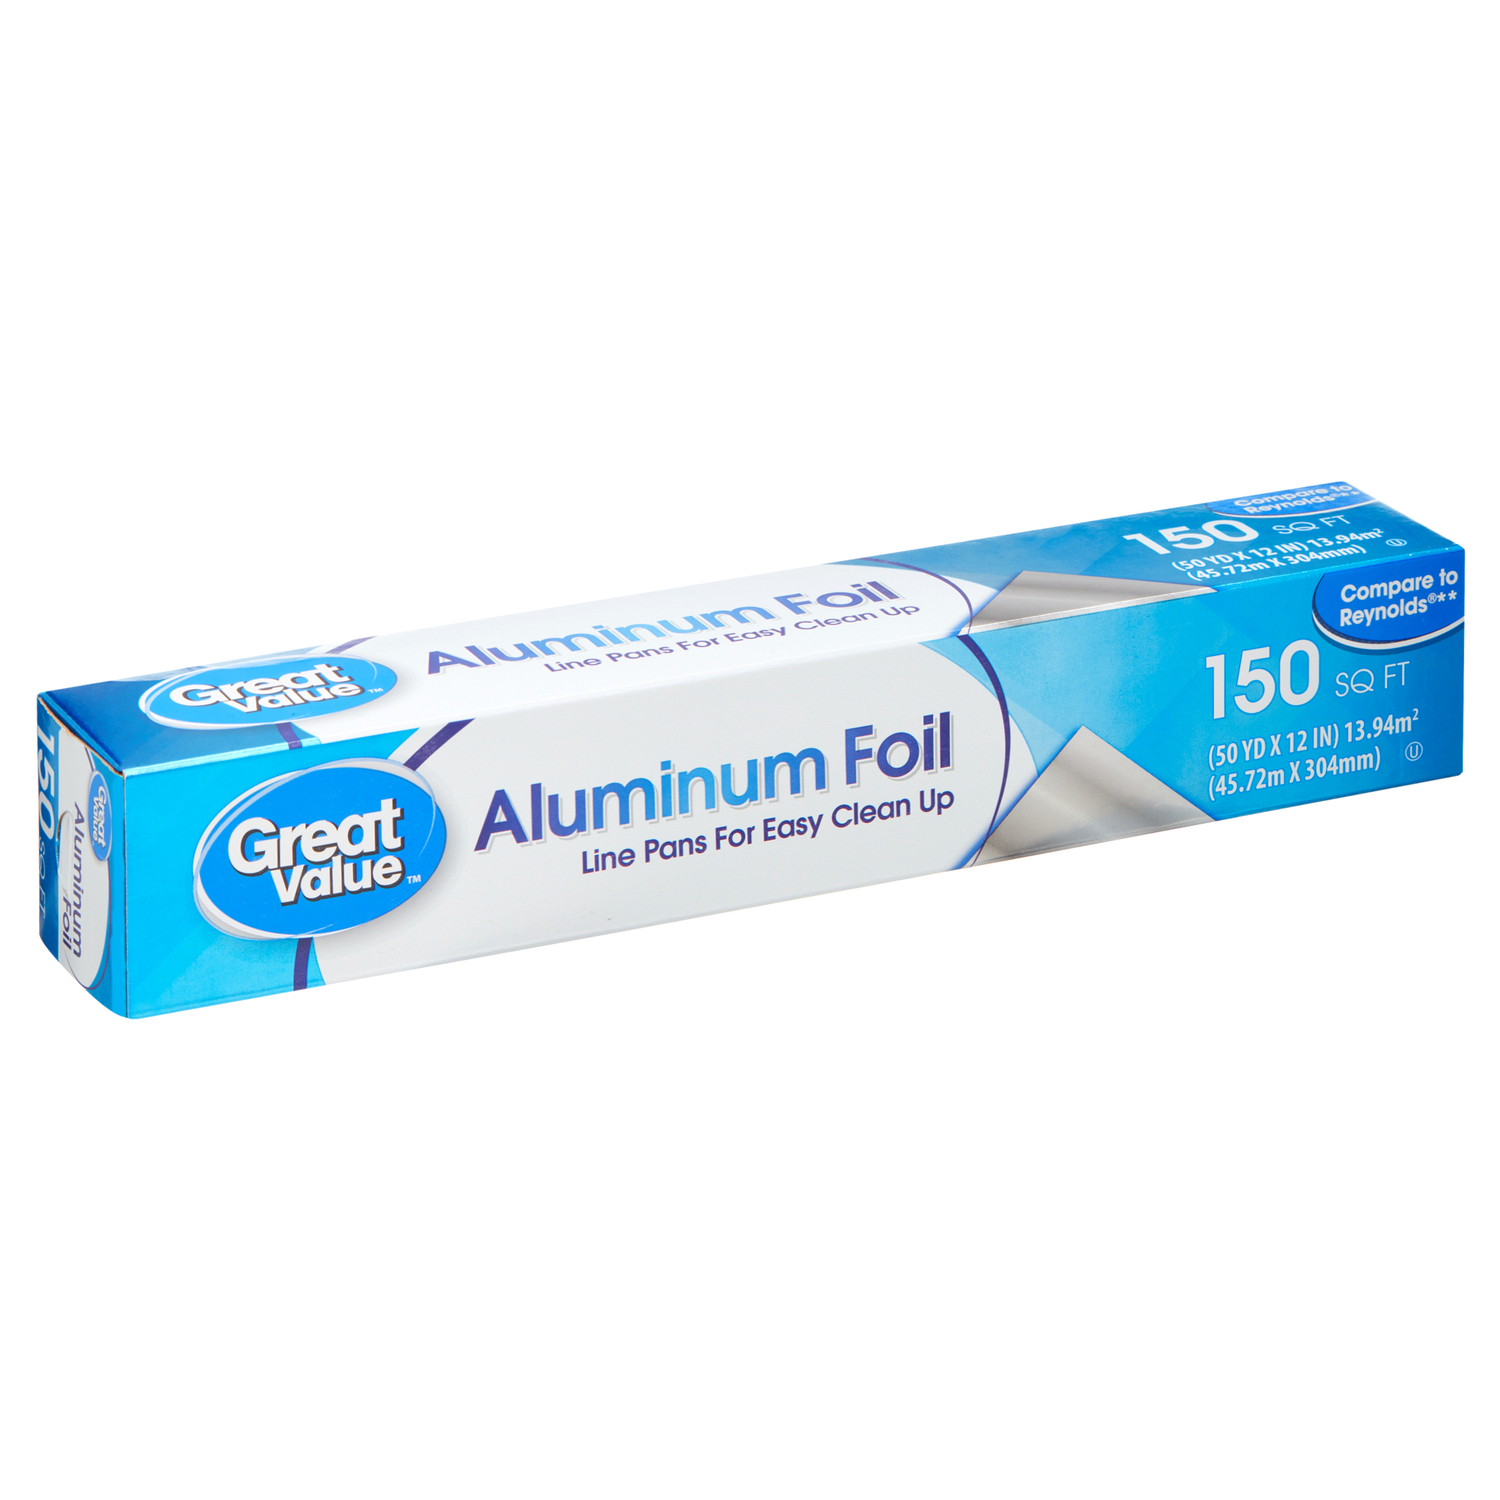 Great Value Heavy Duty Aluminum Foil, 12 In,  150 Sq Ft